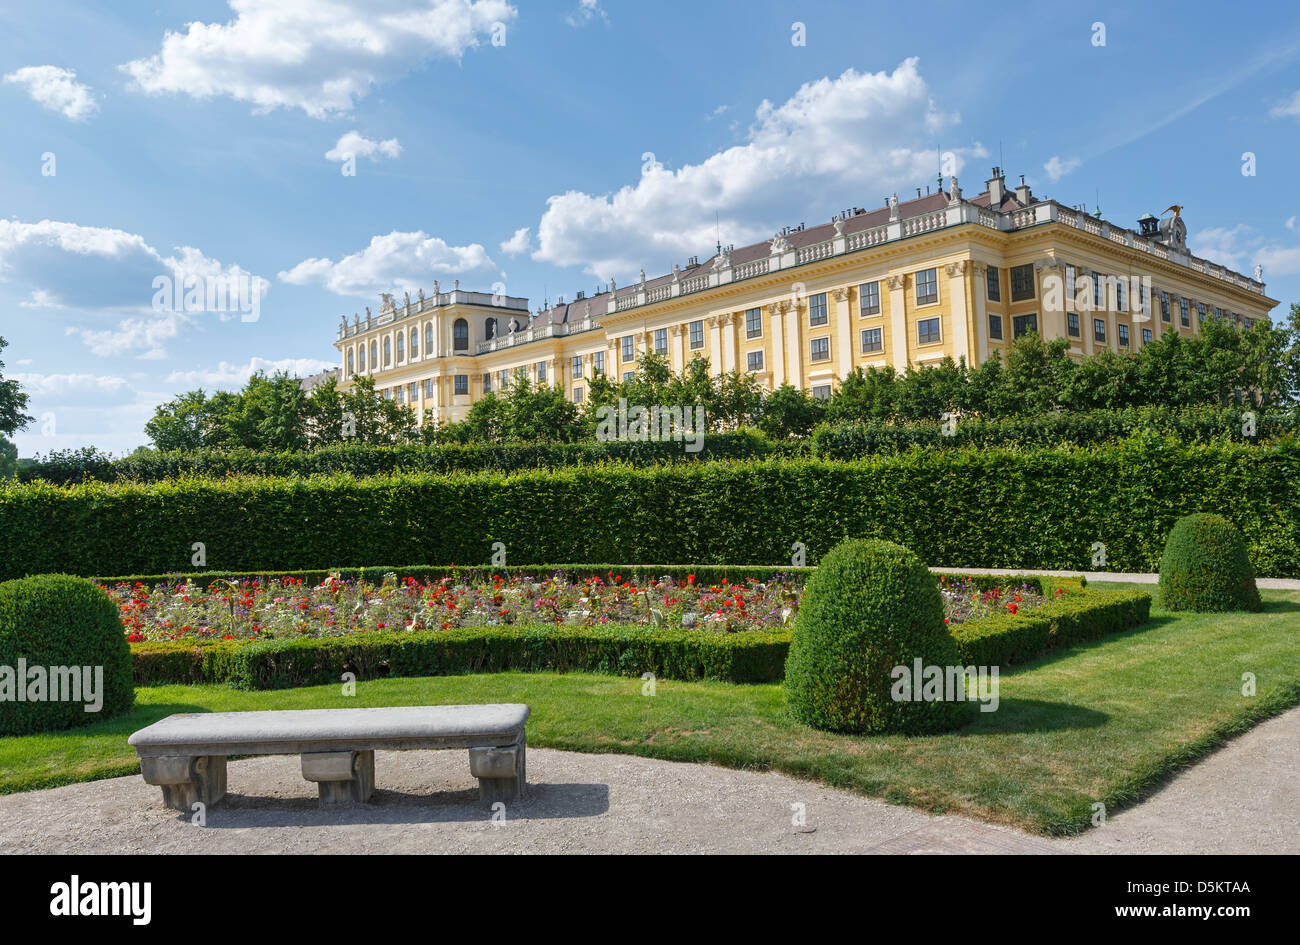 Area before Schonbrunn Palace (build 16-17 century) with blossoming flowers on lawn. Vienna, Austria. Stock Photo